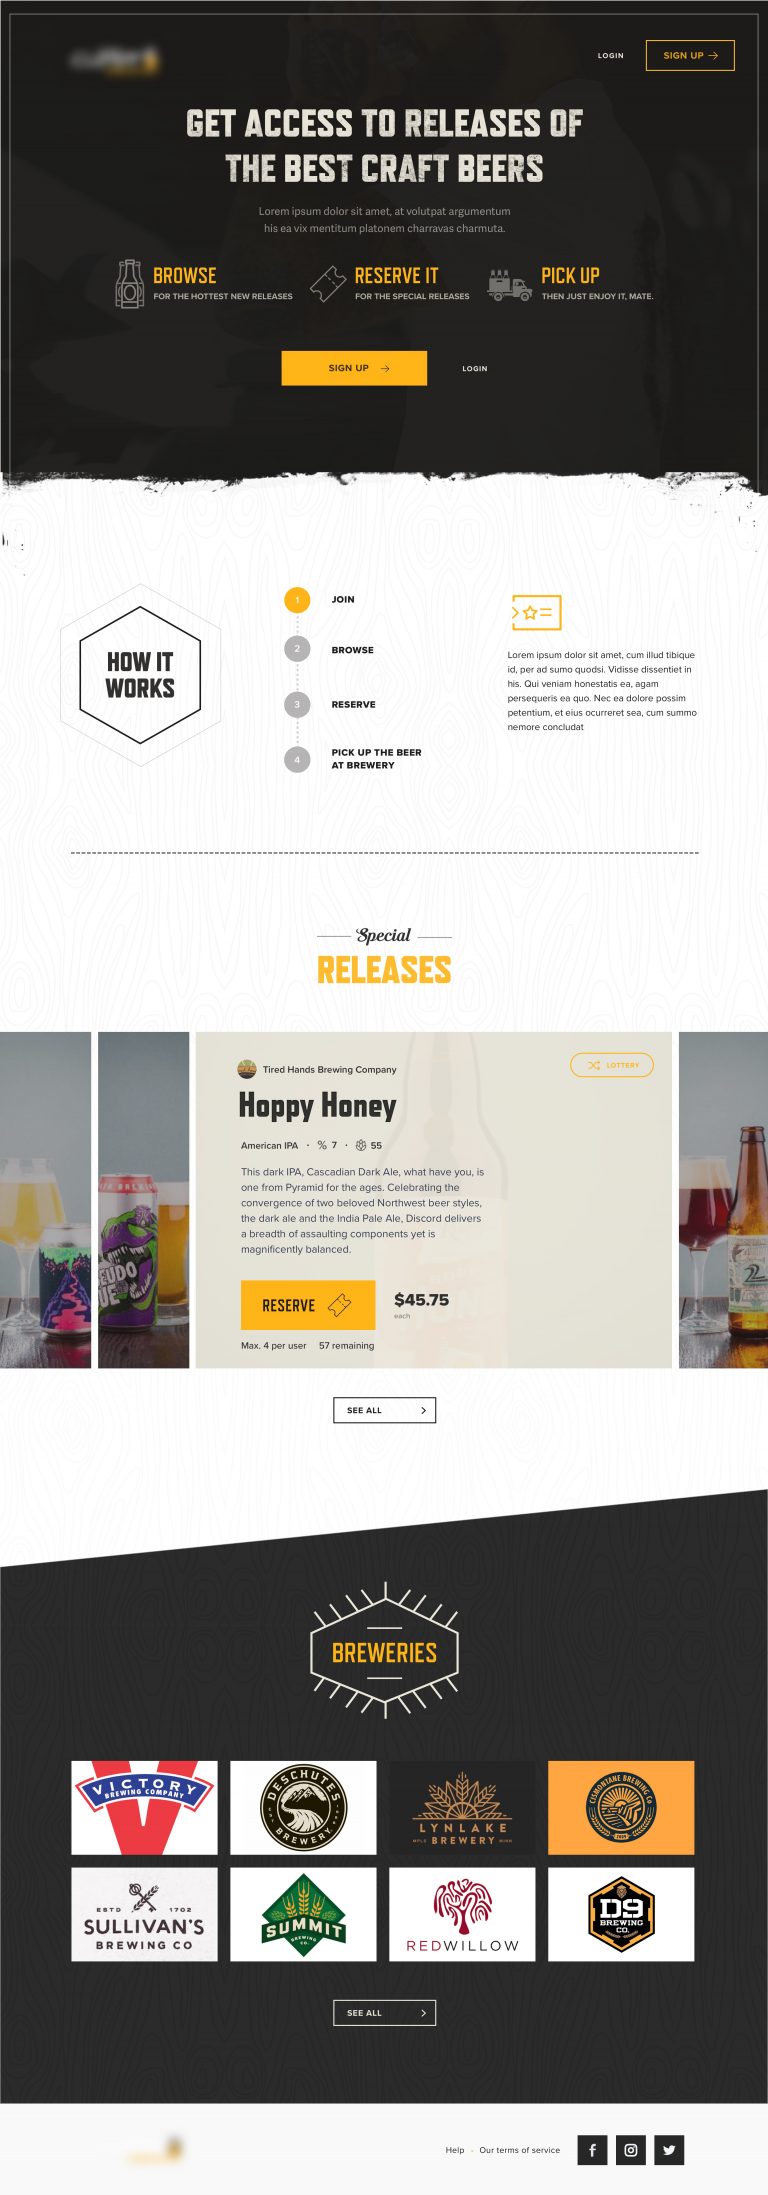 35+ Clean and Creative Website Design ideas for Inspiration